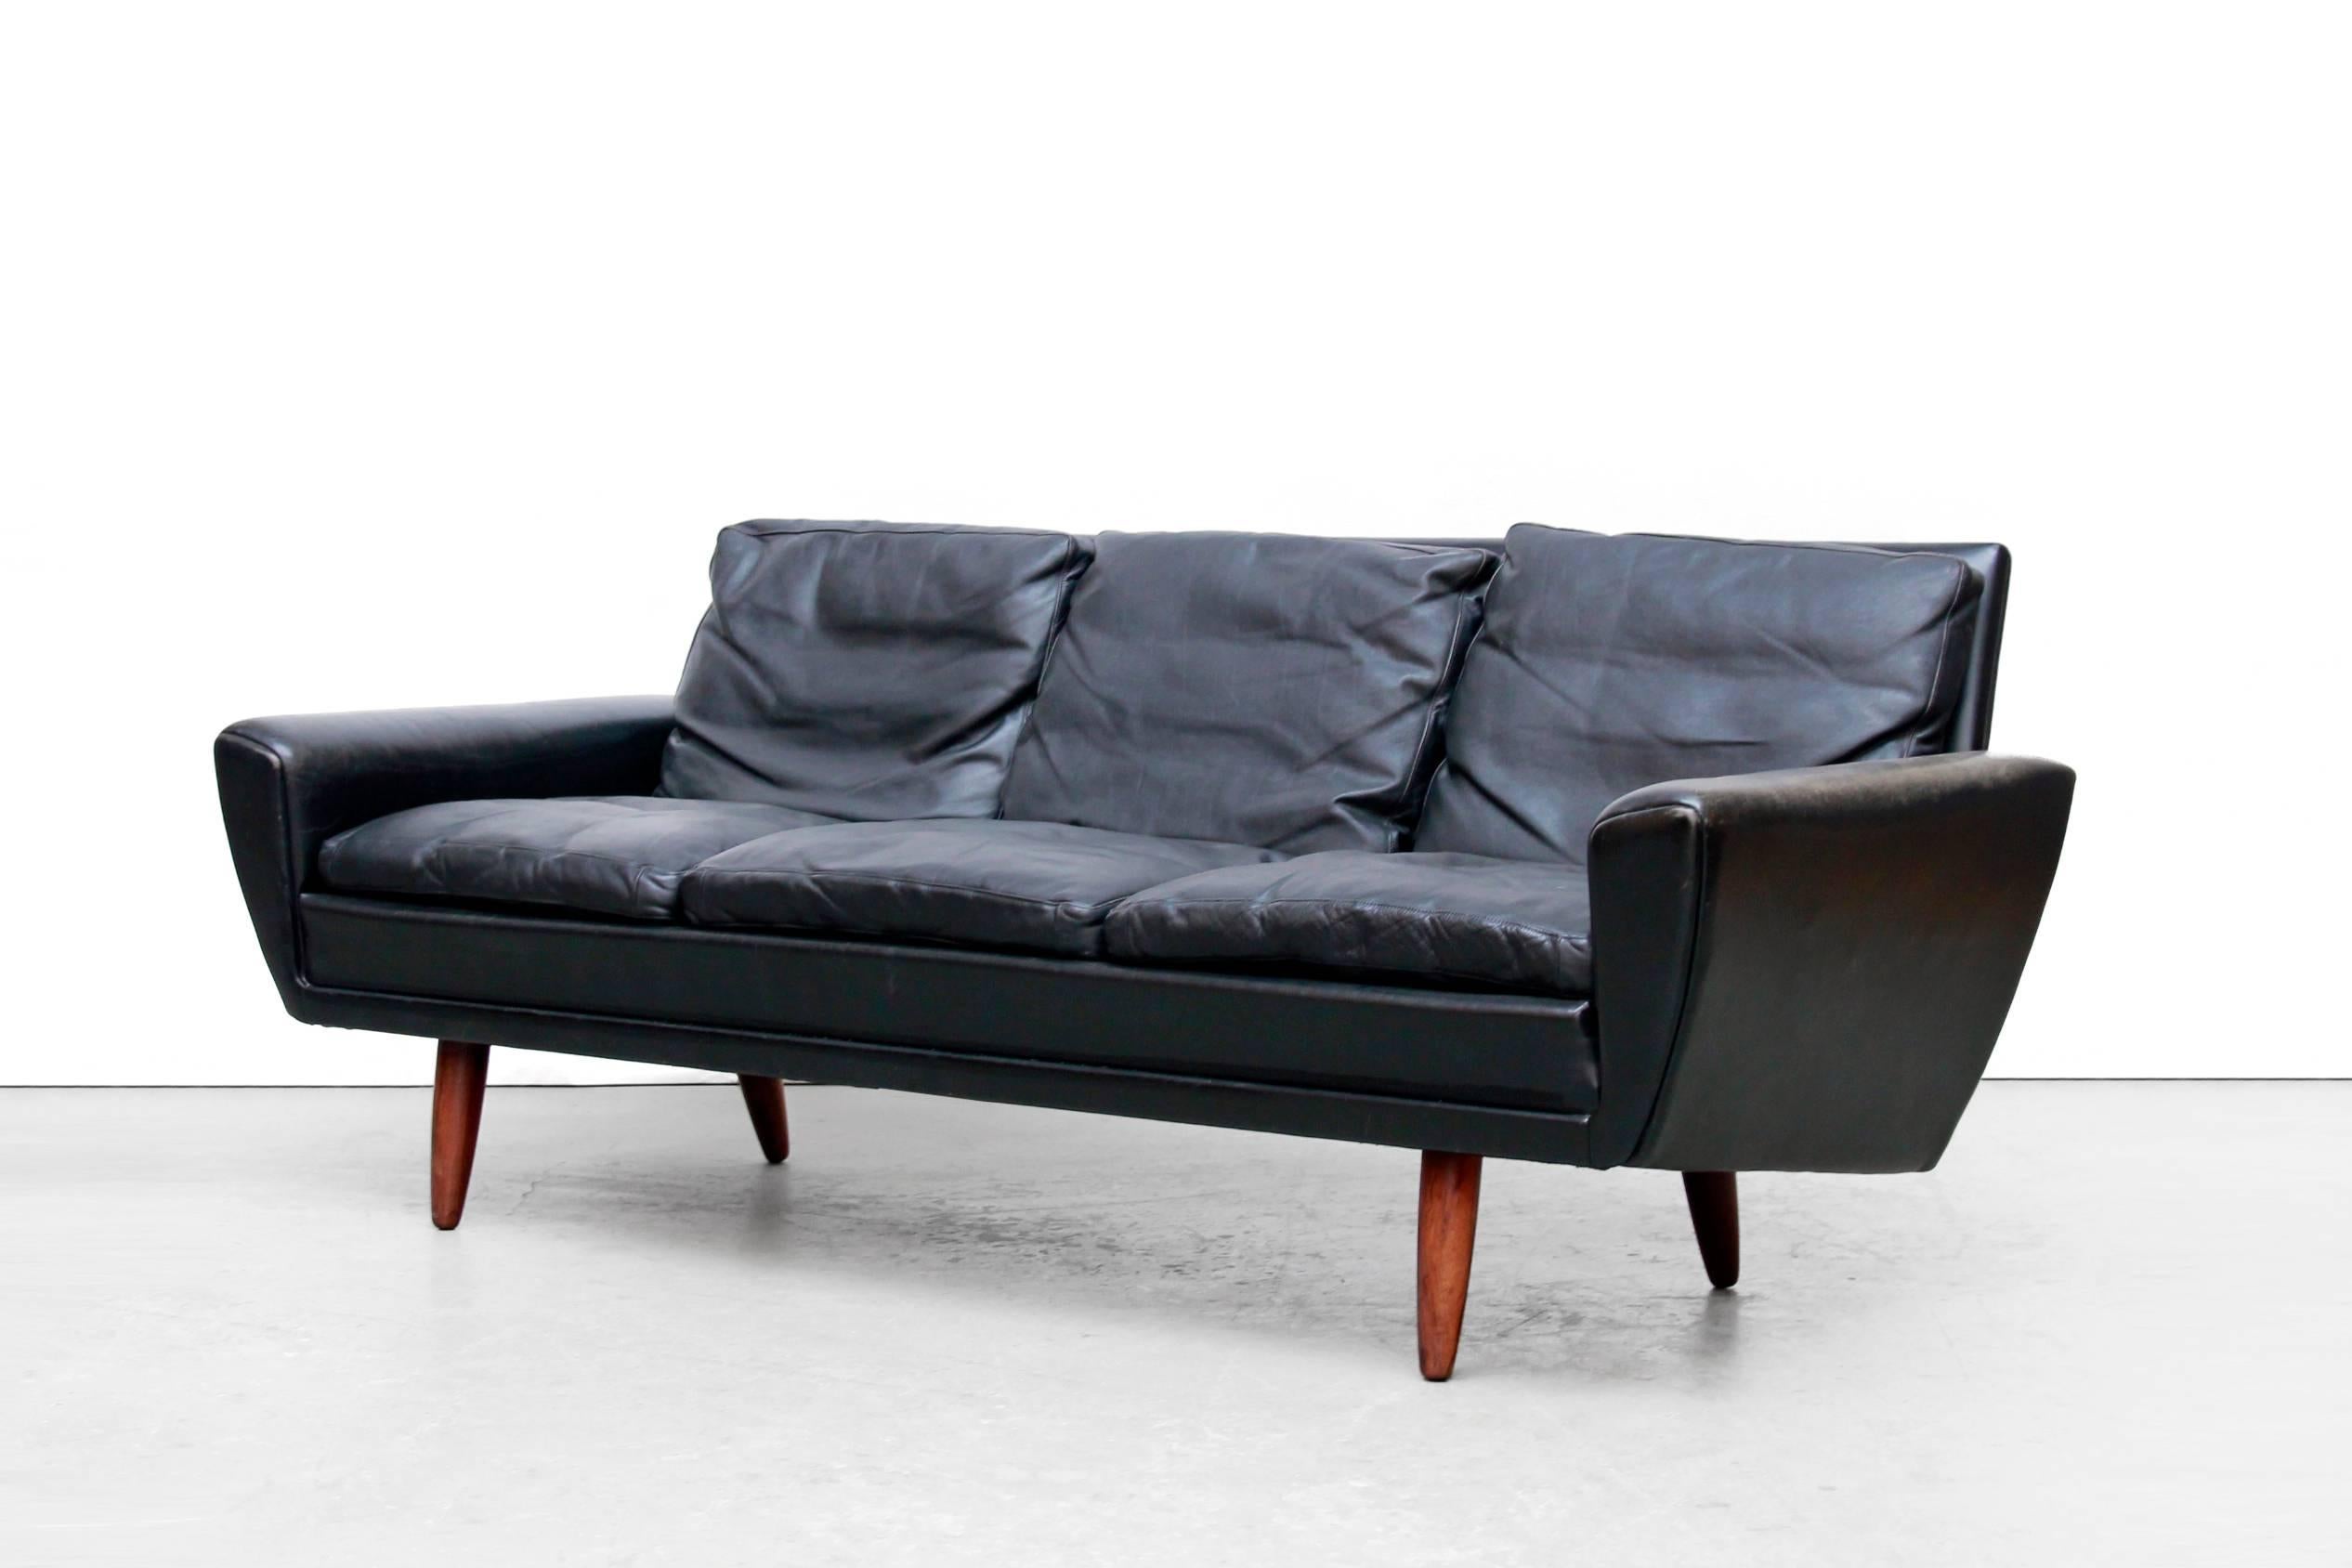 Black leather sofa designed by Georg Thams for Vejen Polstermøbelfabrik in Denmark.
This three-seat sofa has the name: 'Model 64' because it was designed in 1964.
The sofa is made of thick black leather and has conical wooden legs.
The cushions